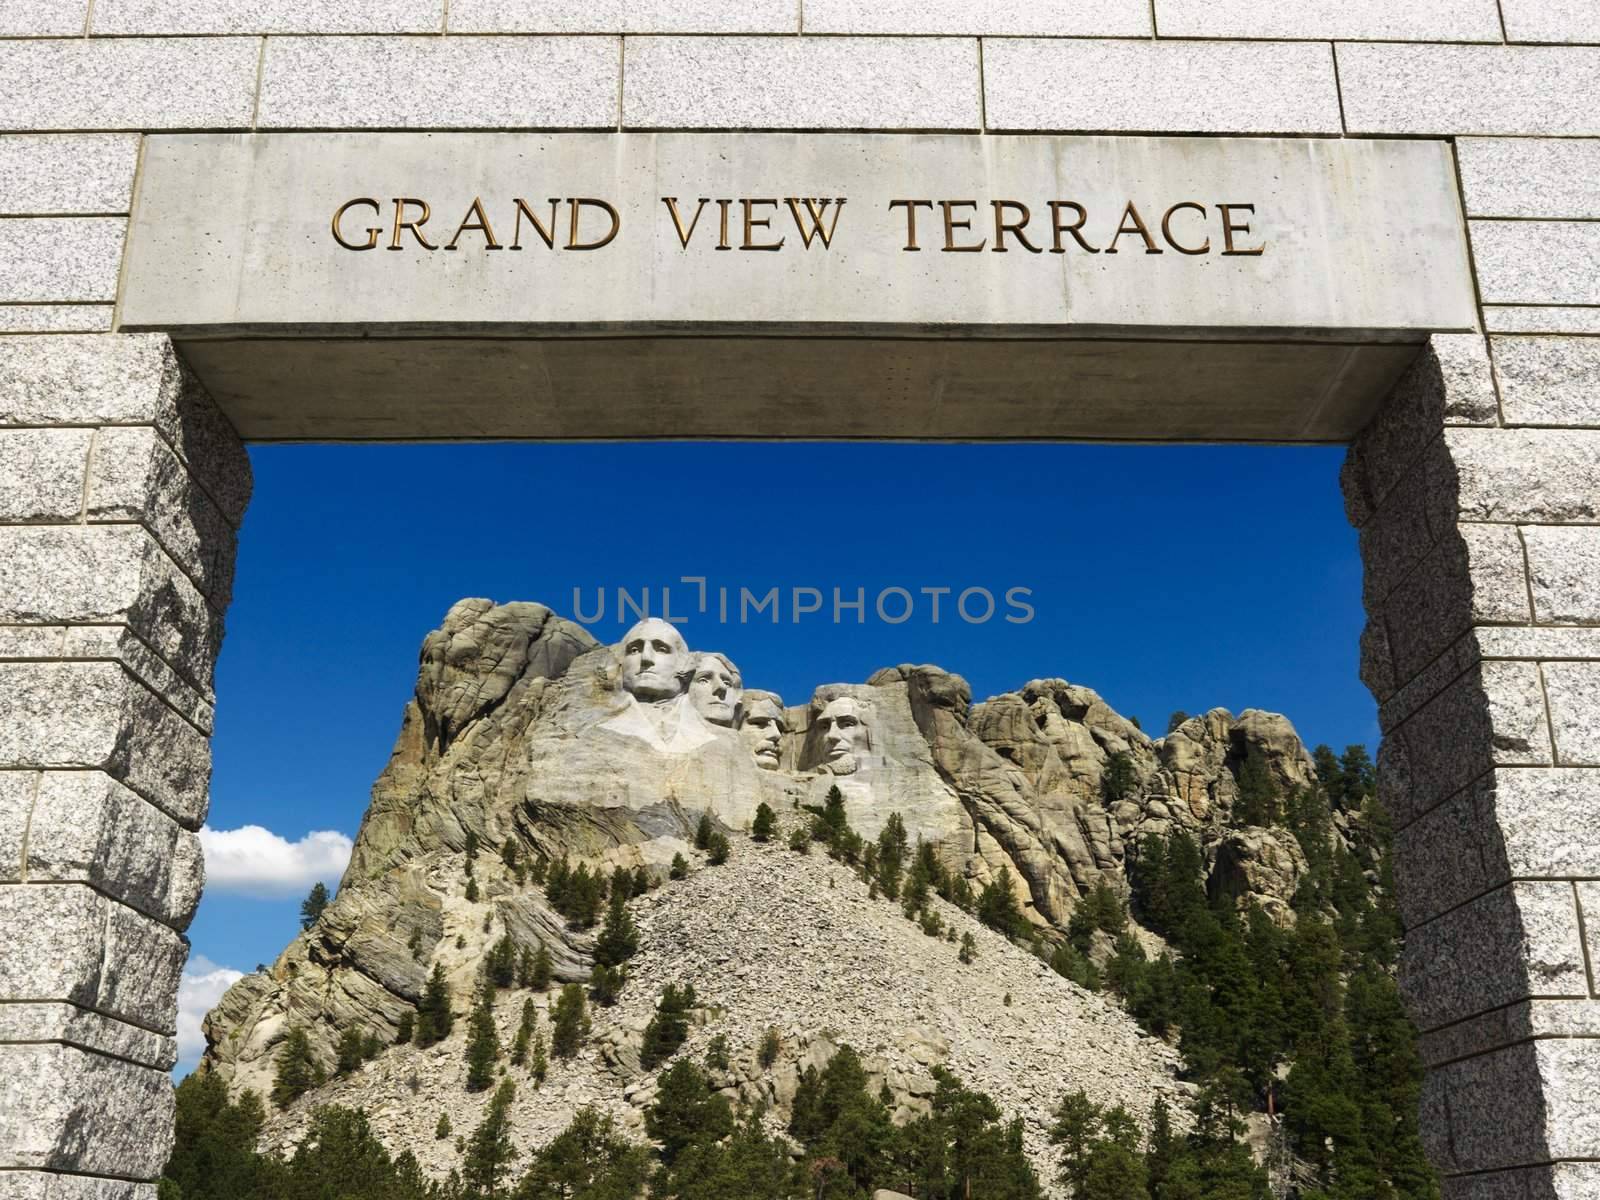 Mount Rushmore National Memorial as seen from Grand View Terrace archway.